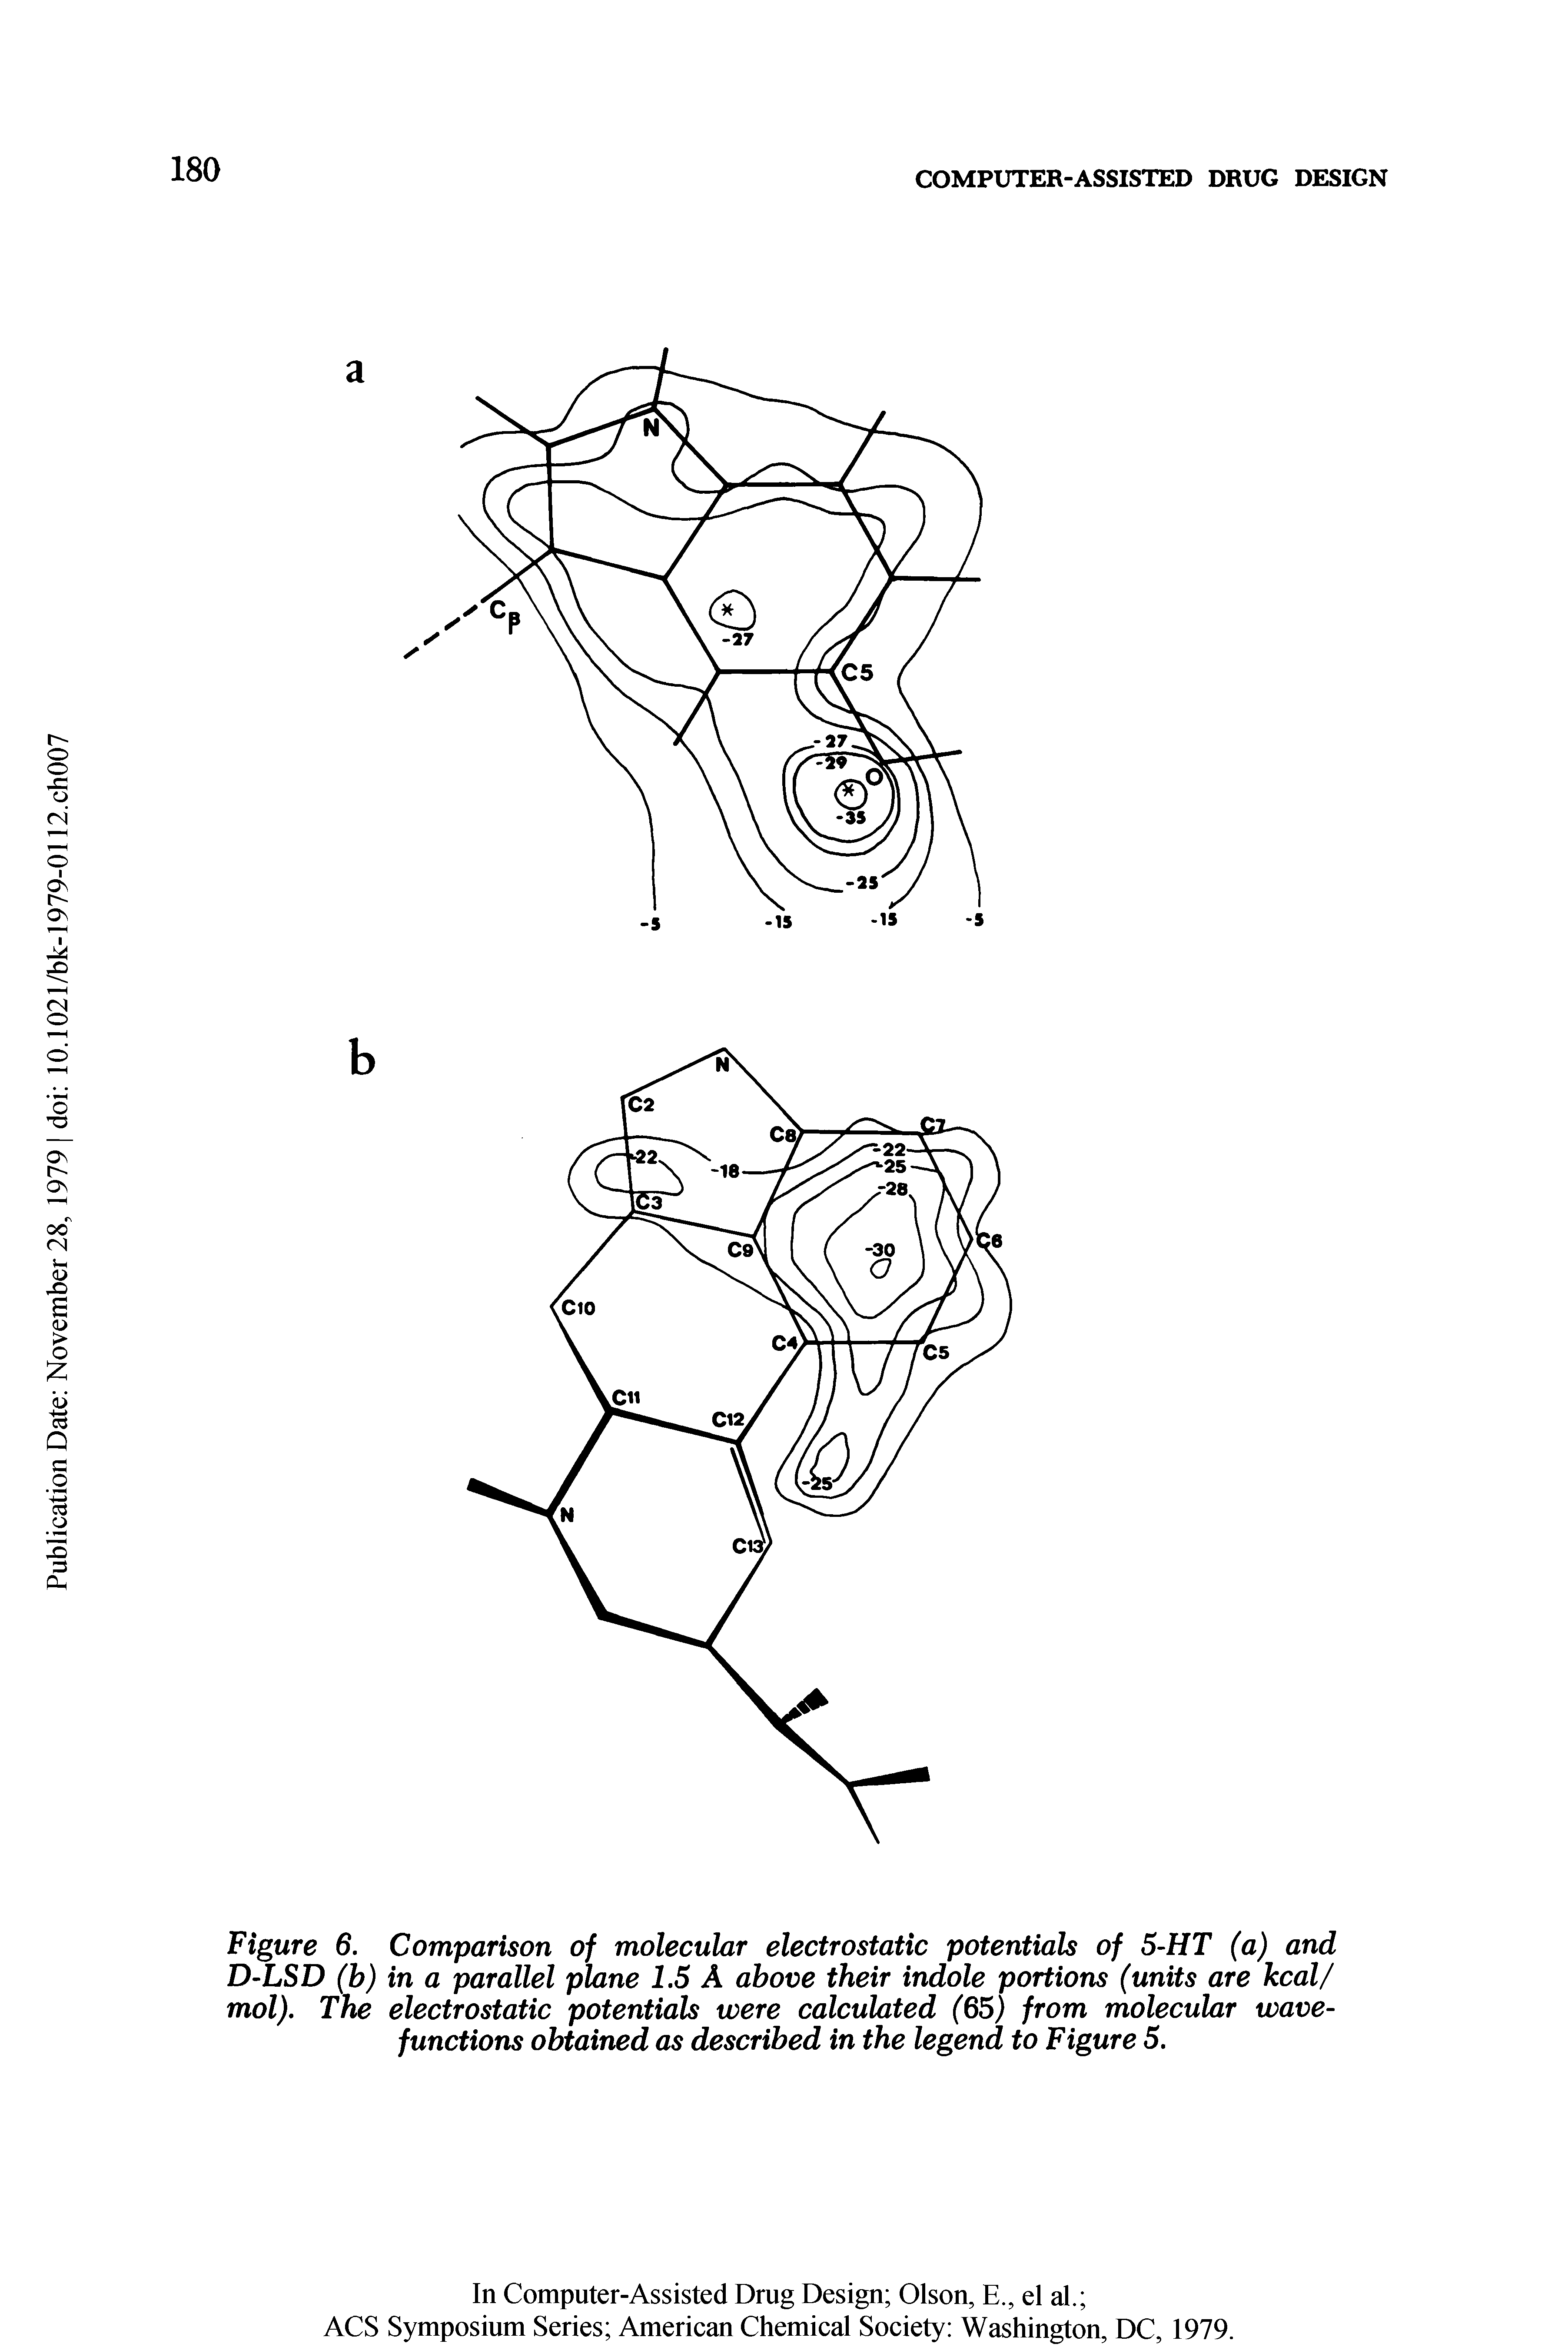 Figure 6. Comparison of molecular electrostatic potentials of 5-HT (a) and D-LSD (b) in a parallel plane 1.5 A above their indole portions (units are heal/ mol). The electrostatic potentials were calculated (65) from molecular wave-functions obtained as described in the legend to Figure 5.